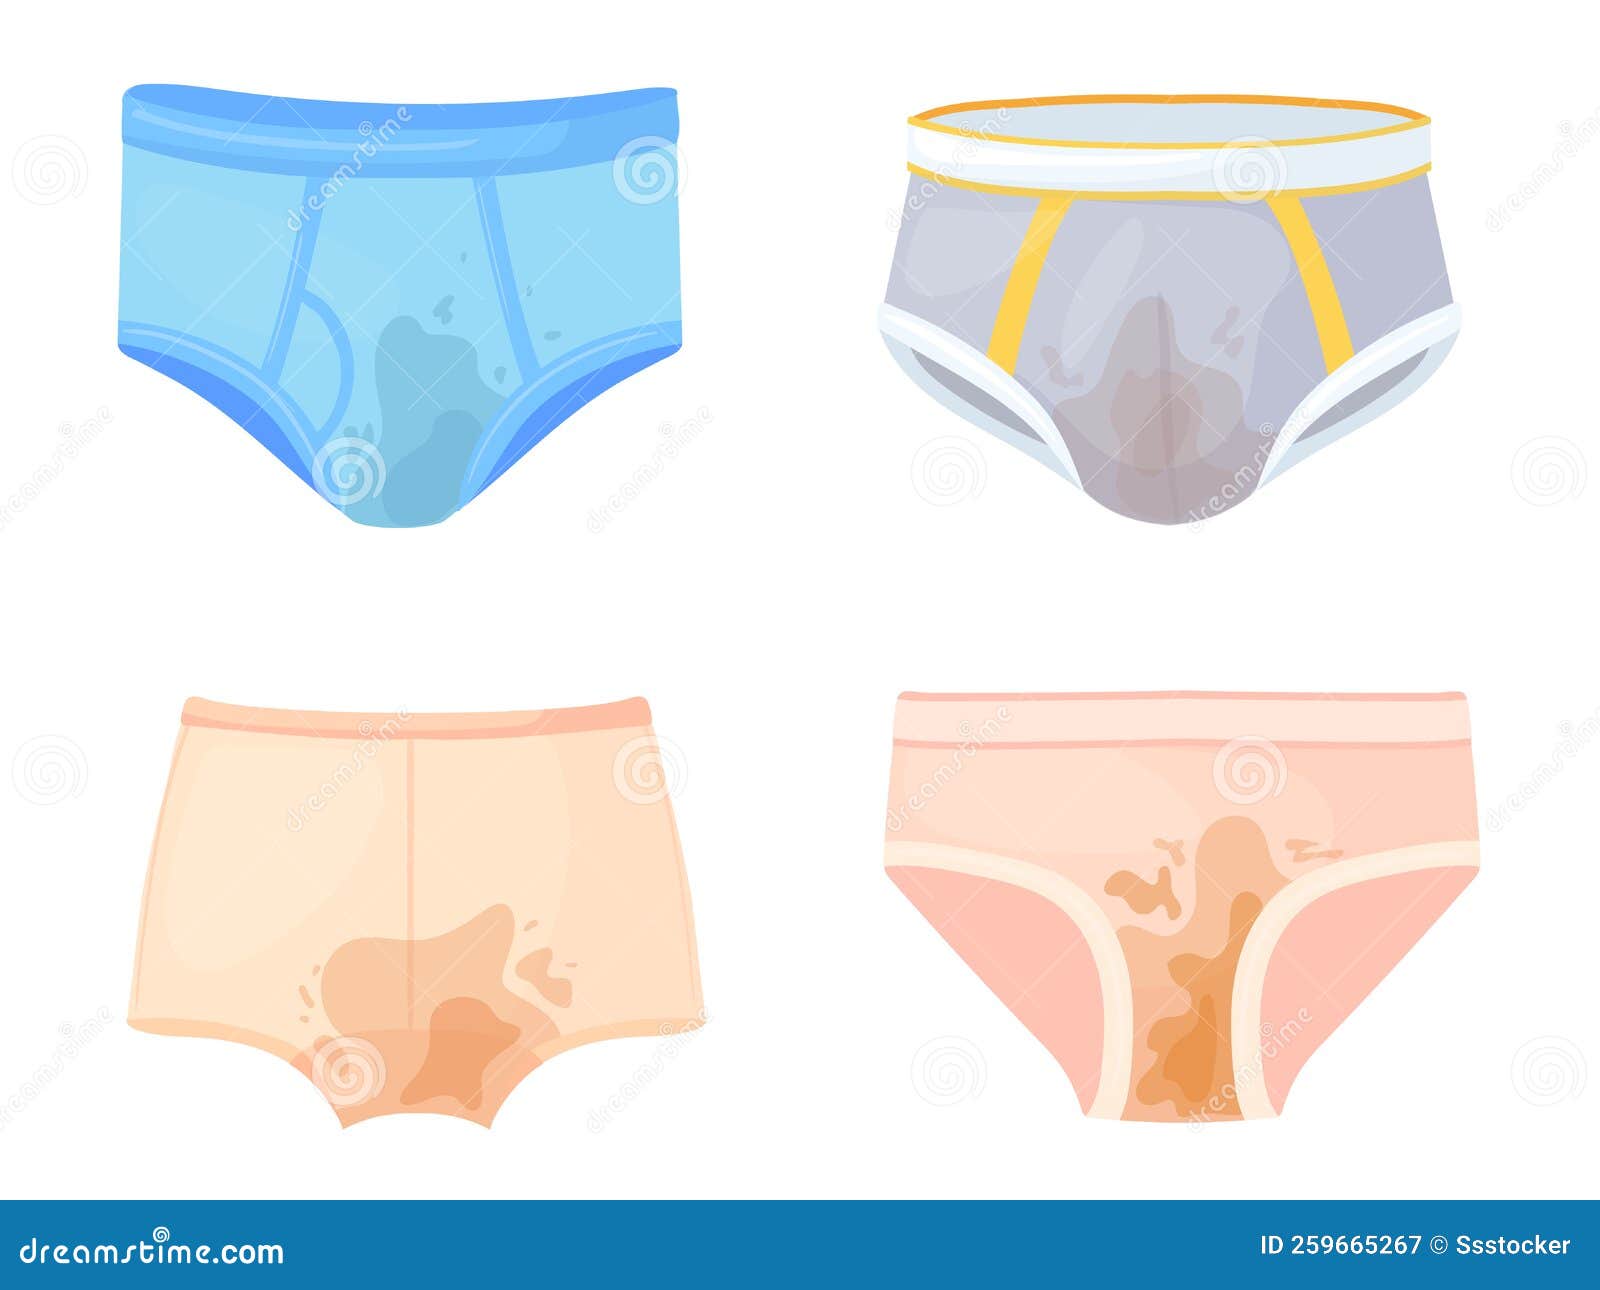 Premium Vector  Mens brief or thong underpants isolated on white